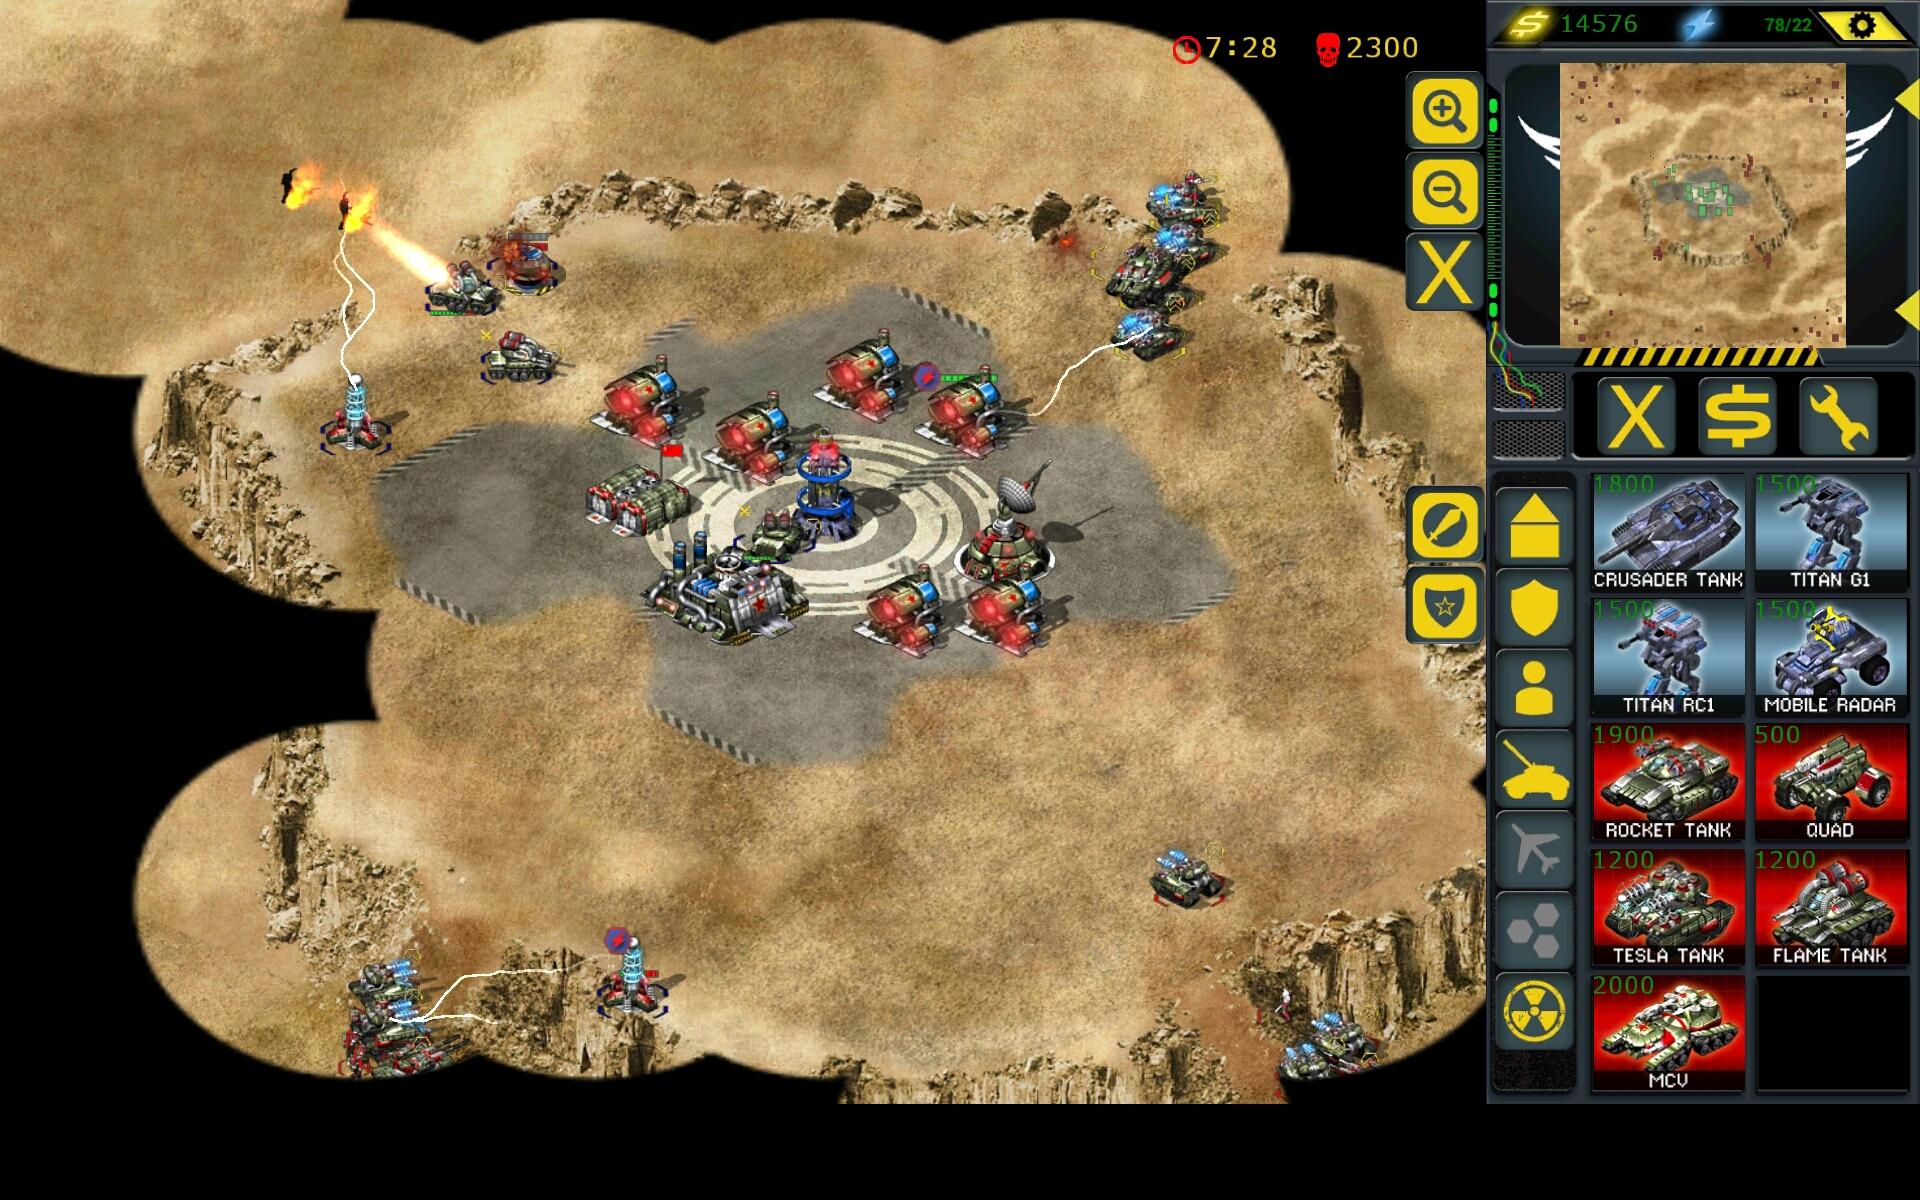 Redsun RTS Premium for Android